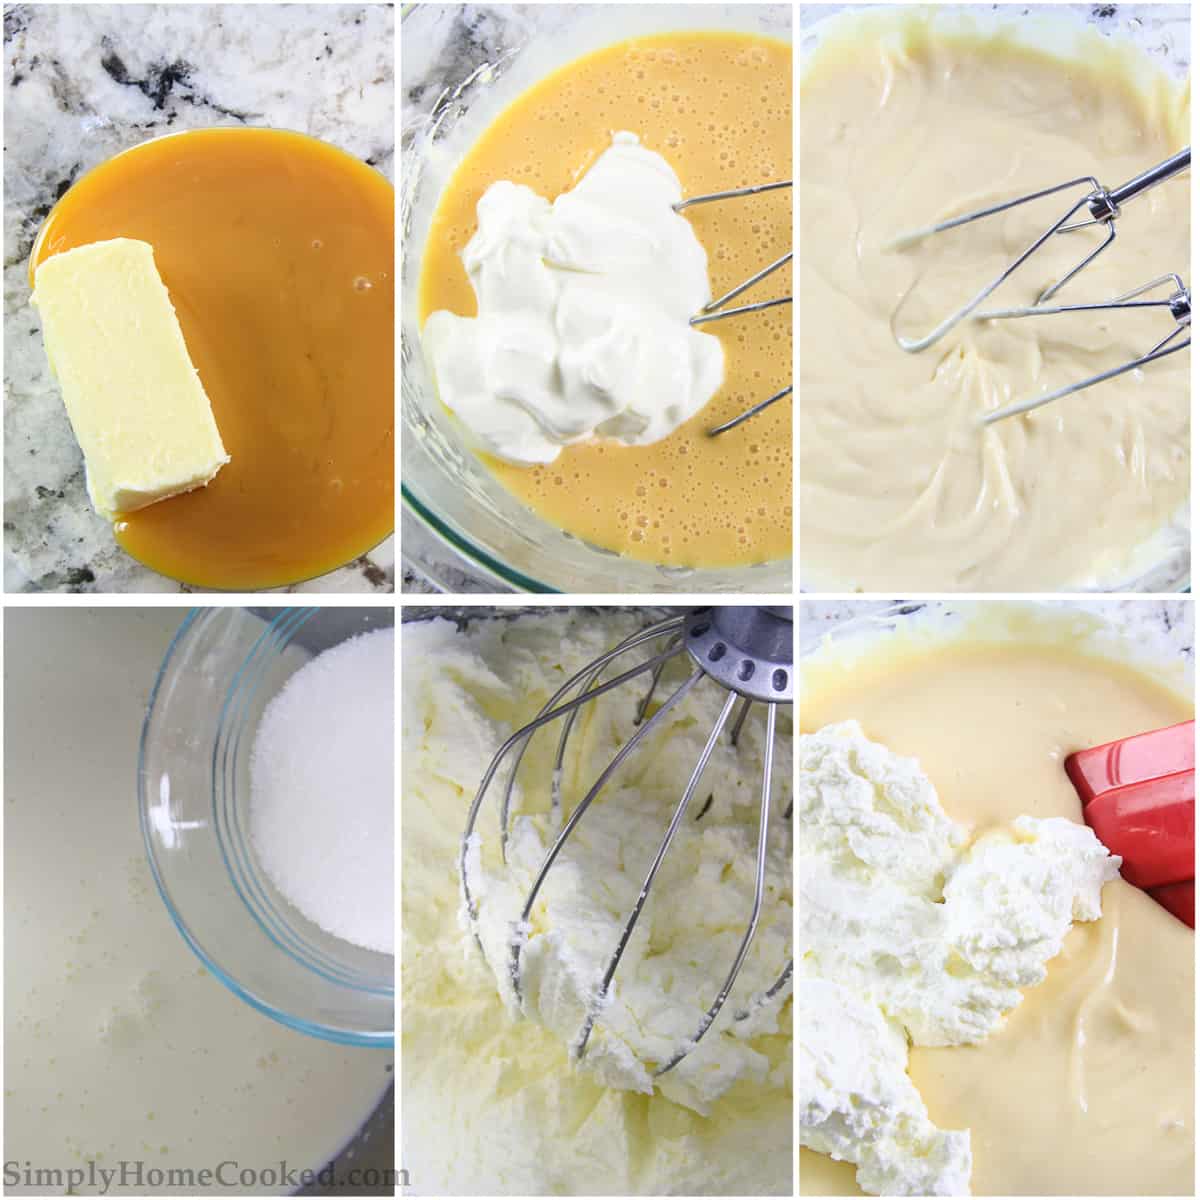 Six tiled images of butter, sour cream, and condensed milk being mixed into a cream frosting with a whisk and beater, then folded together,